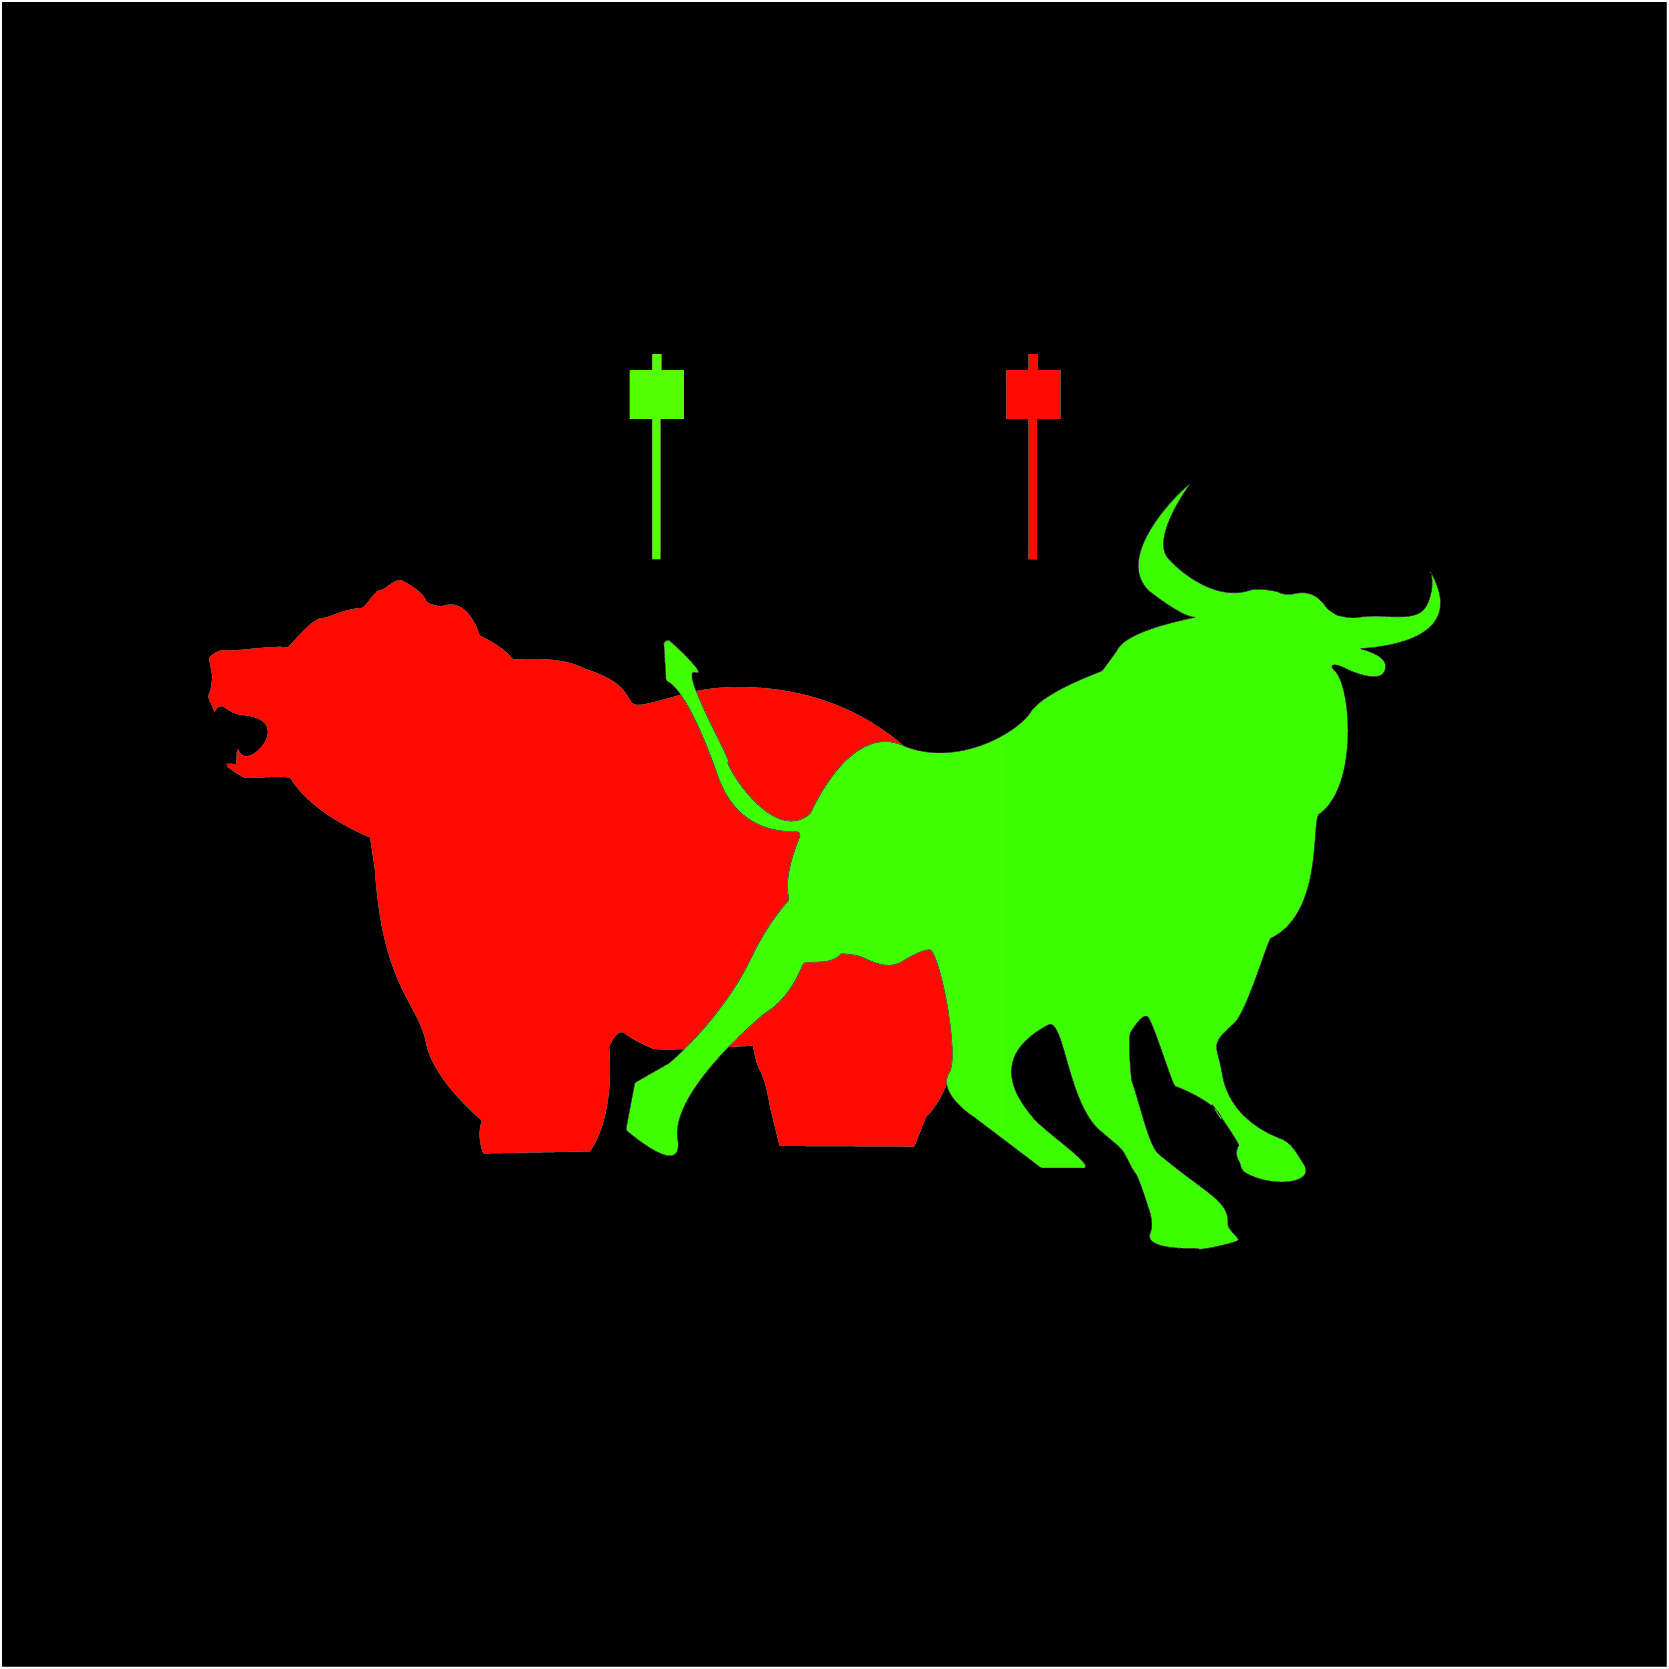 Will the Stock Market Bull Continue to Charge or is it Time to Sell the News